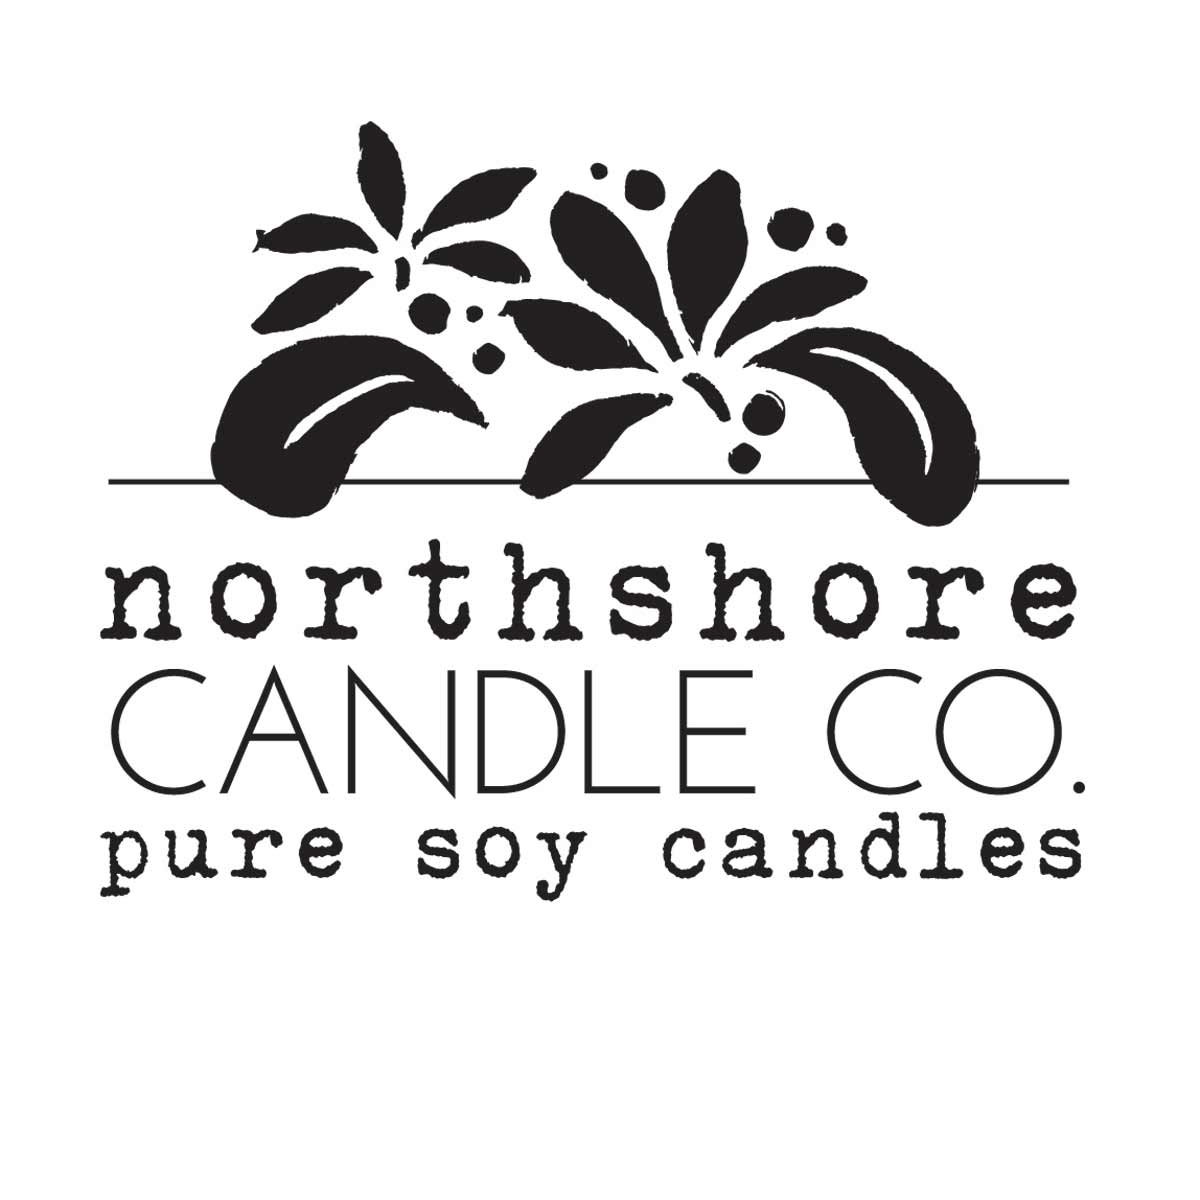   Pure soy candles made in Hawaii. – North Shore Candle Company, LLC  